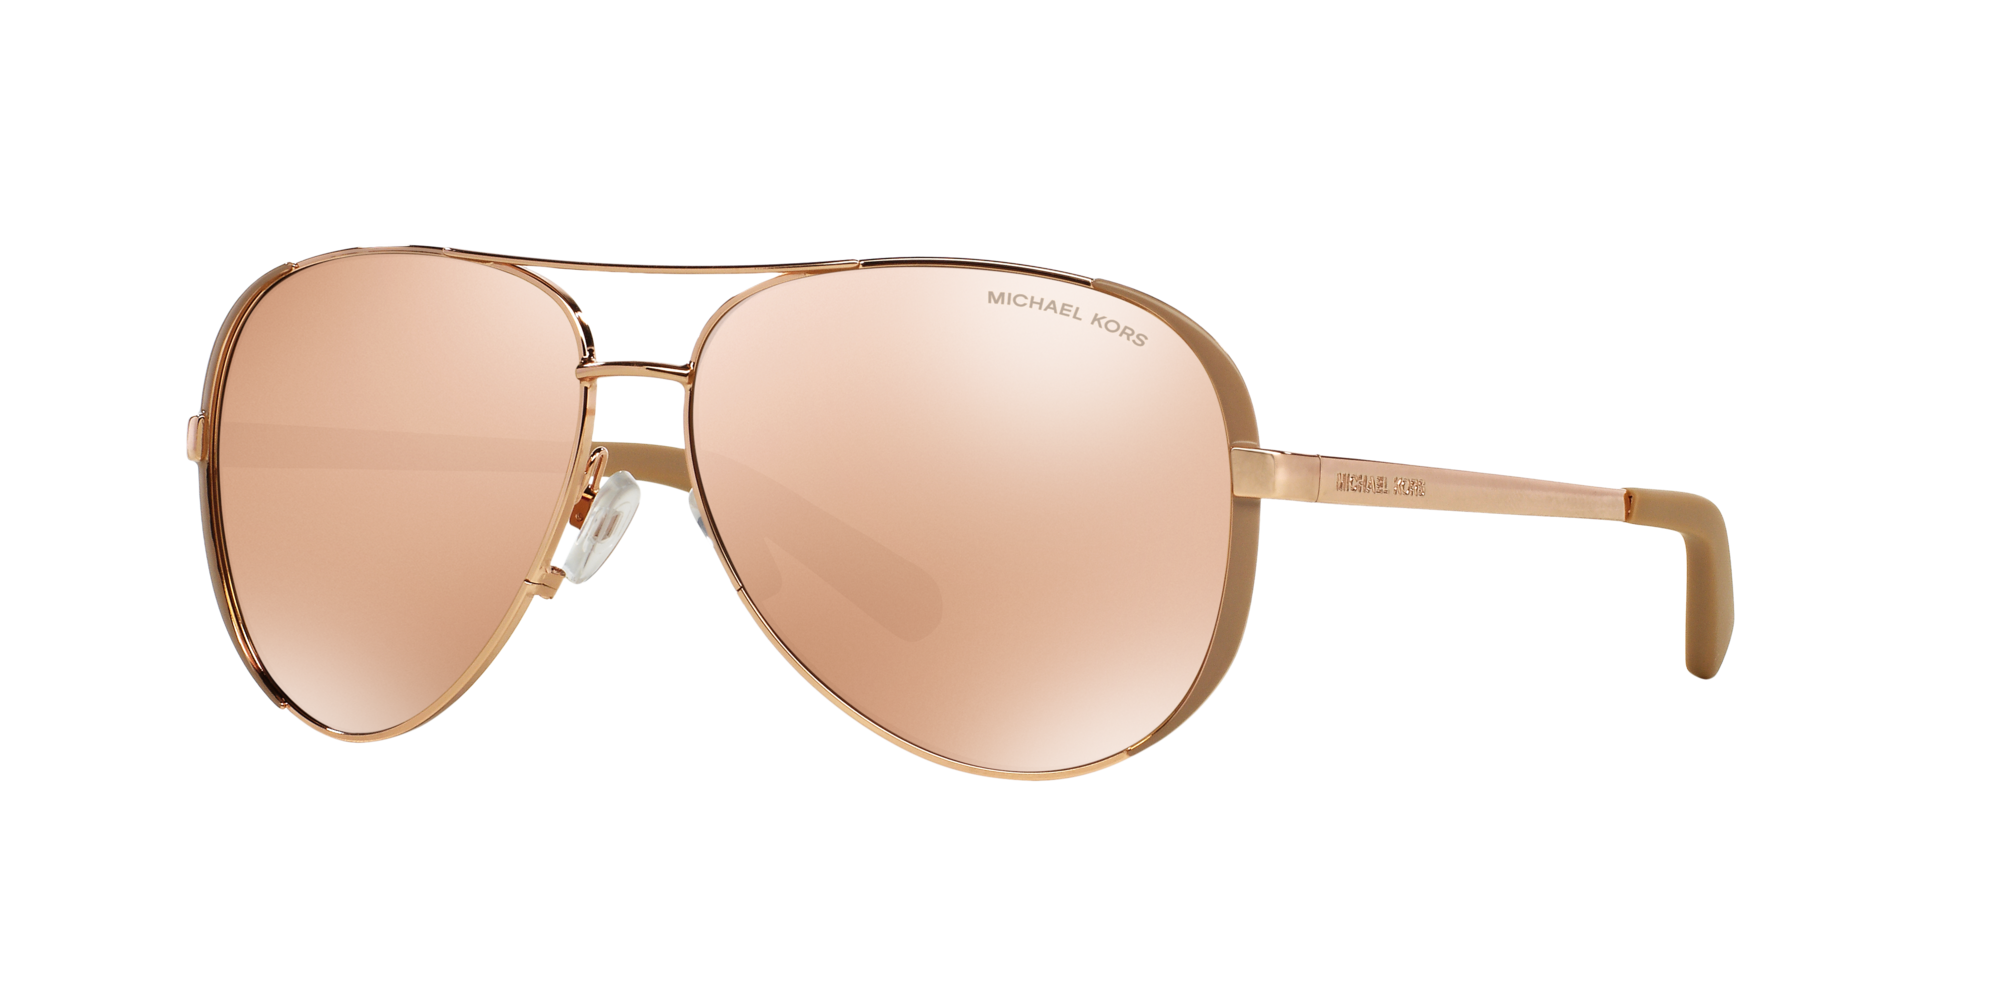 Michael Kors Sonnenbrille MK5004 1017R1 Chelsea Rotgold/taupe